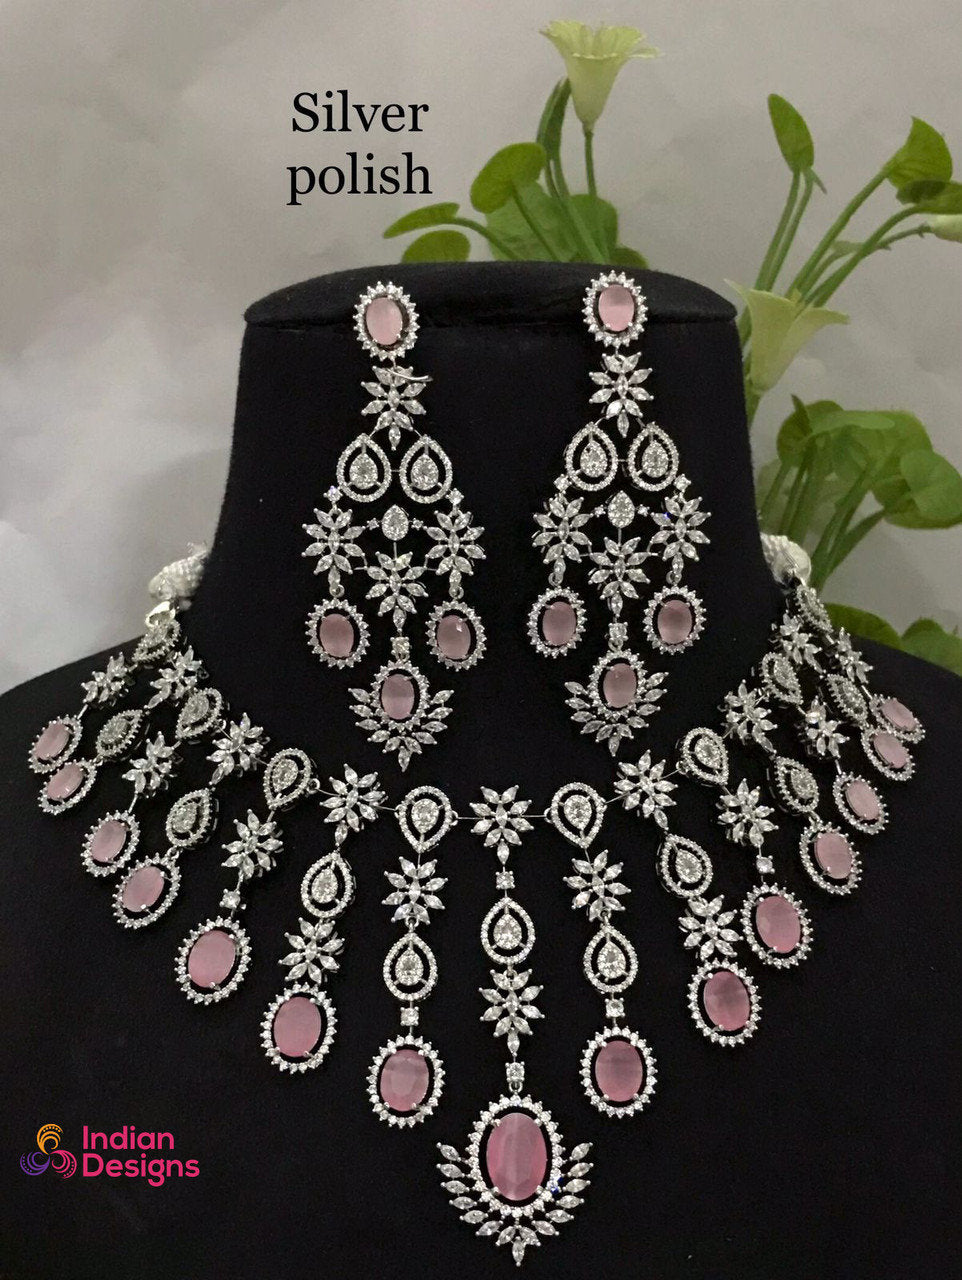 American Diamond Silver Wedding Necklace Earring set | Pink CZ Stone Indian  Jewelry | Mint Green Statement Necklace | Indian Designs Jewelry